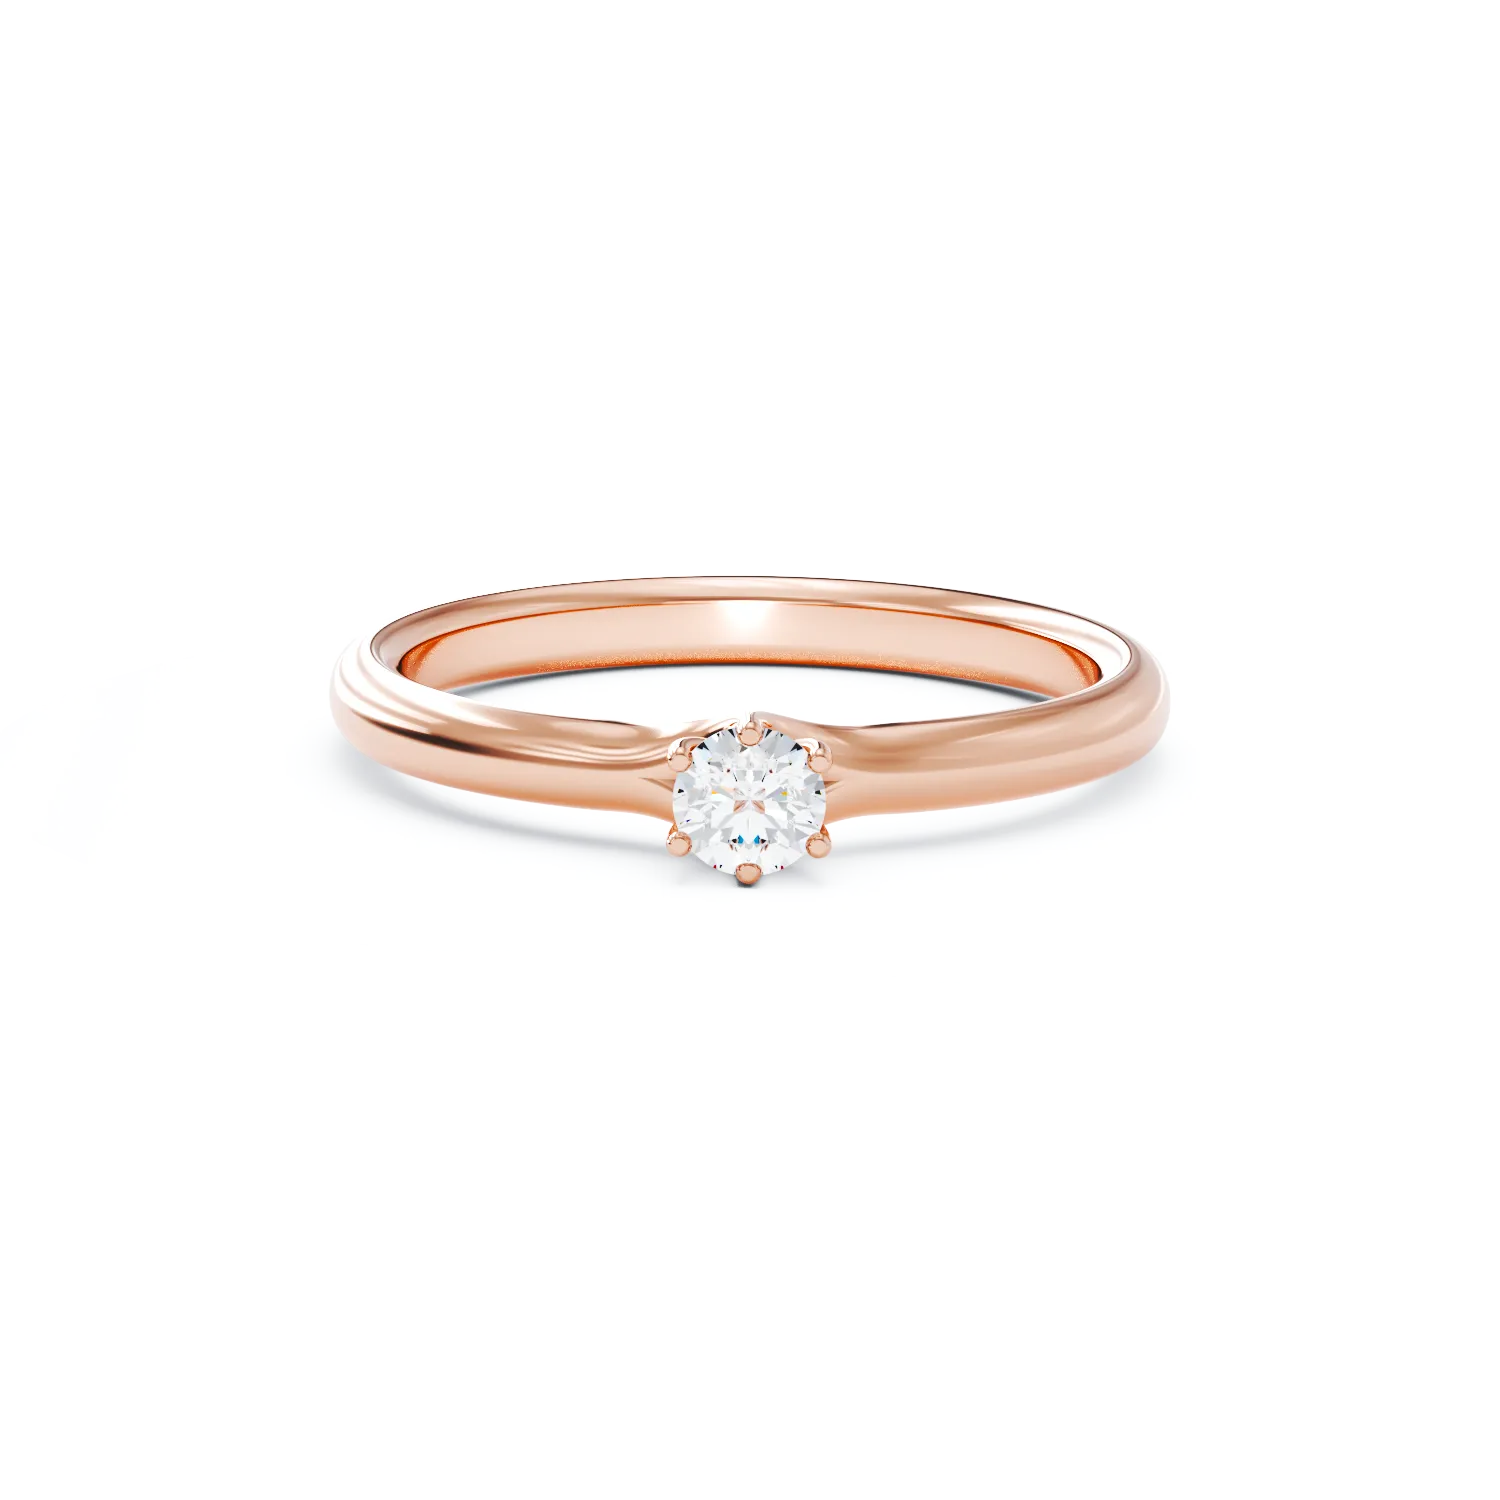 18K rose gold engagement ring with 0.145ct solitaire diamond